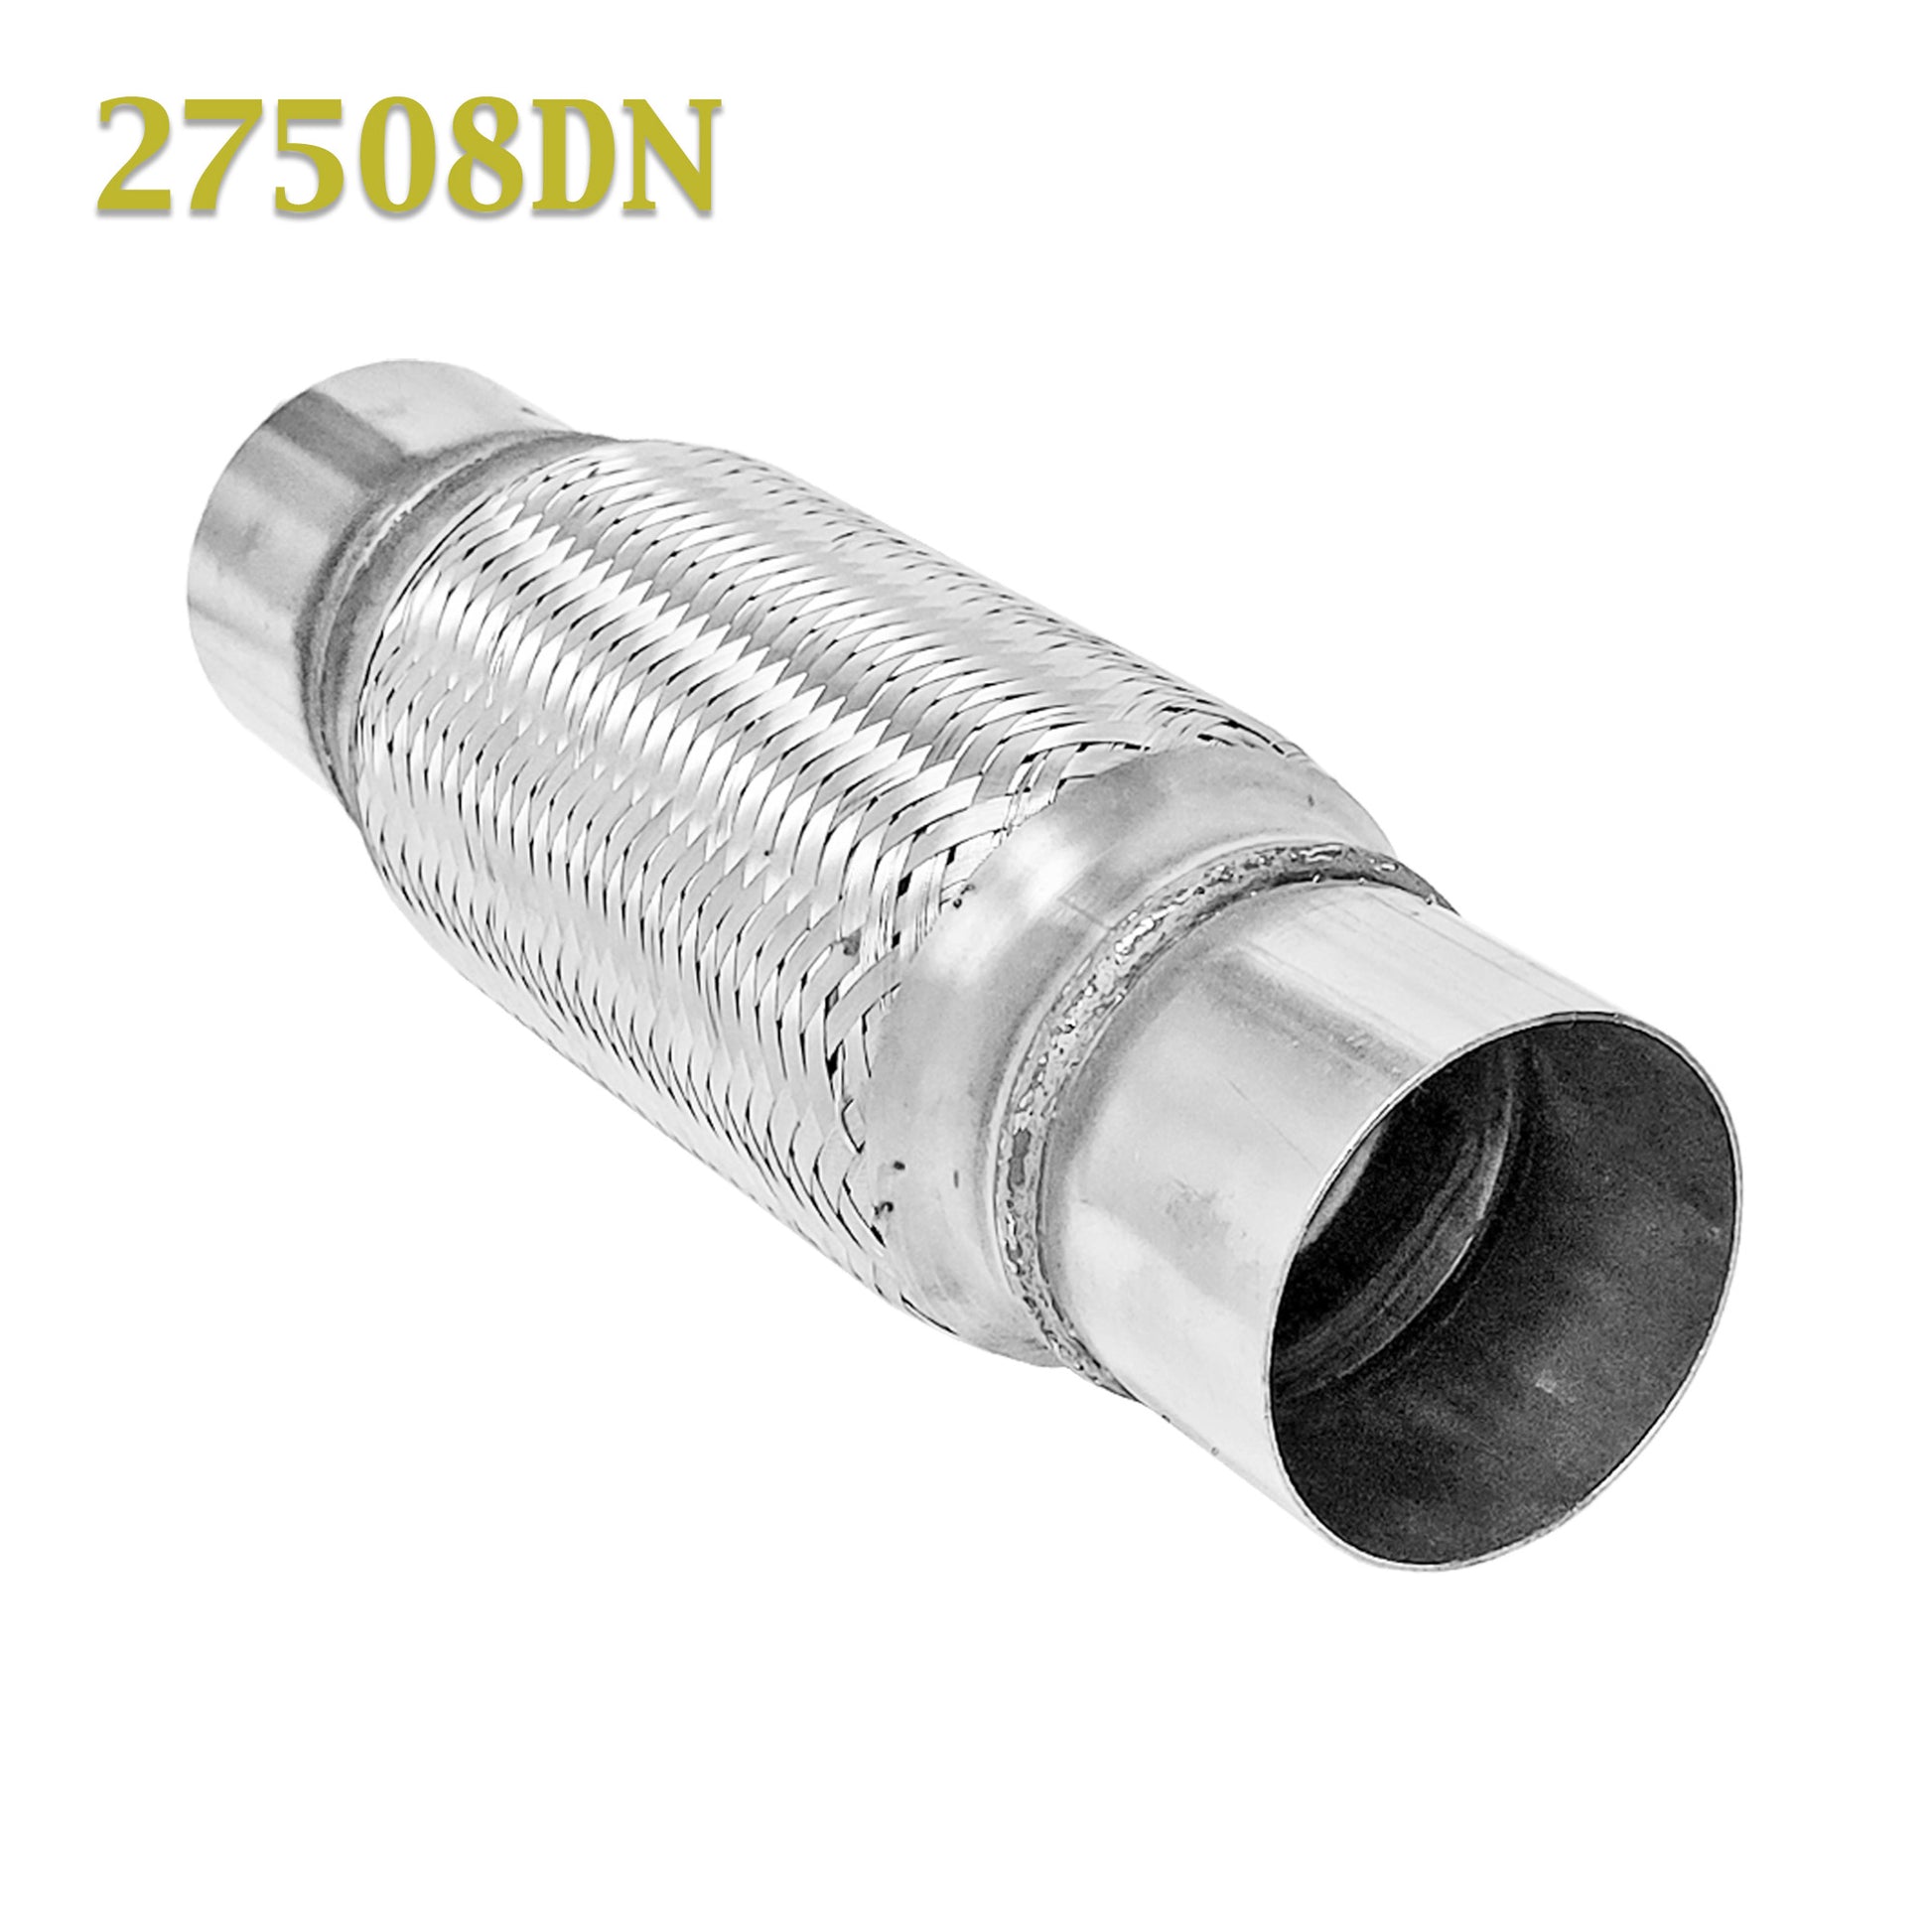 2.75 (2 3/4 in.) x 8 Flex Pipe Exhaust Coupling Quality